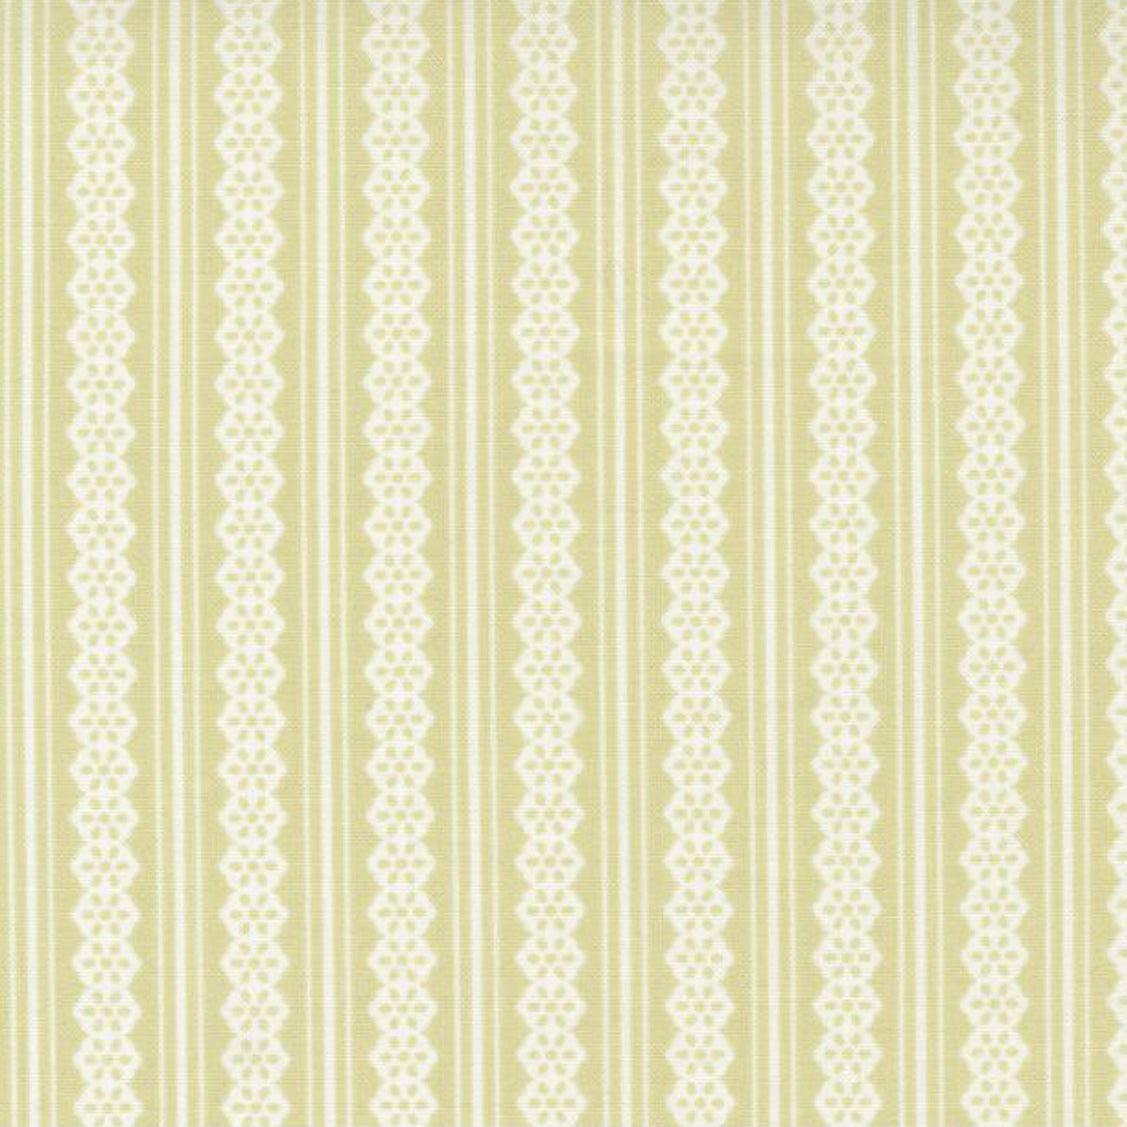 Buttercup and Slate Sprig Lacey Stripes Fabric – End of Bolt – 33″ × 44/45″